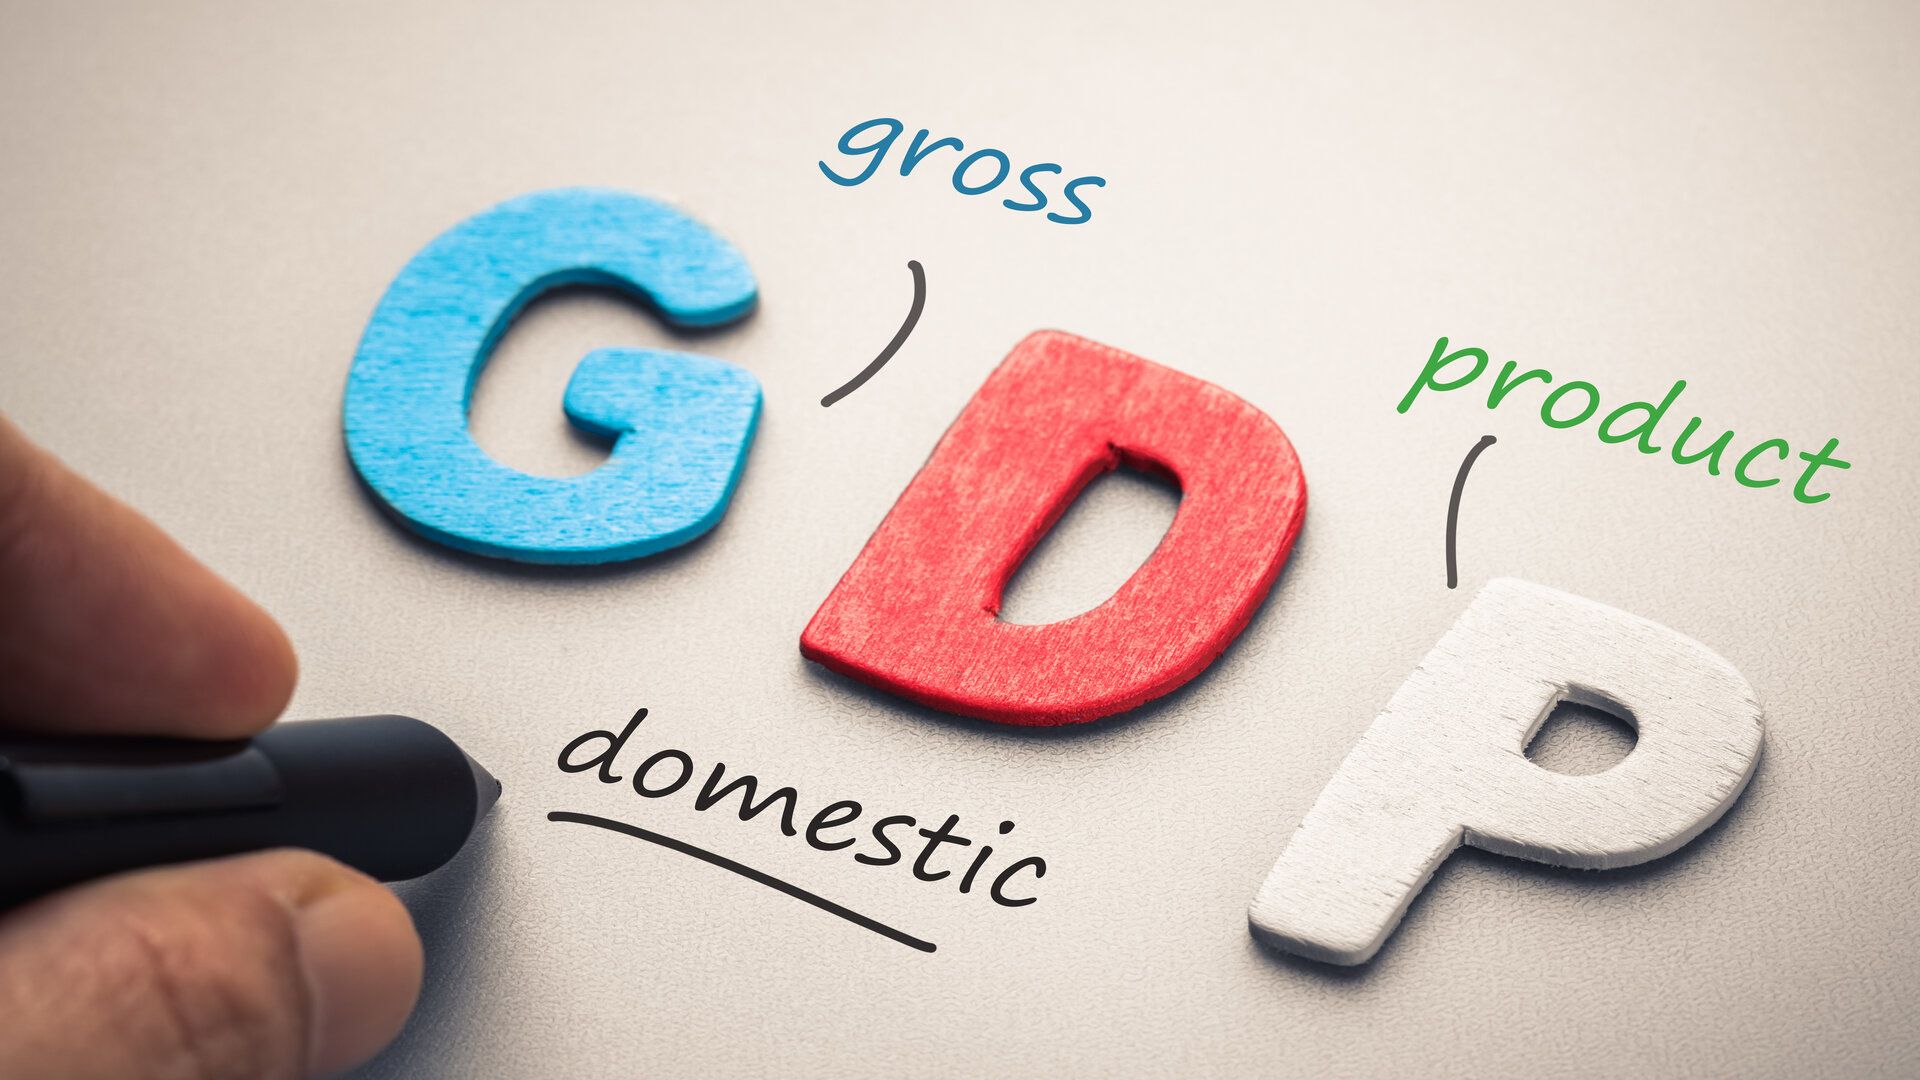 Guide to Gross Domestic Product (GDP)